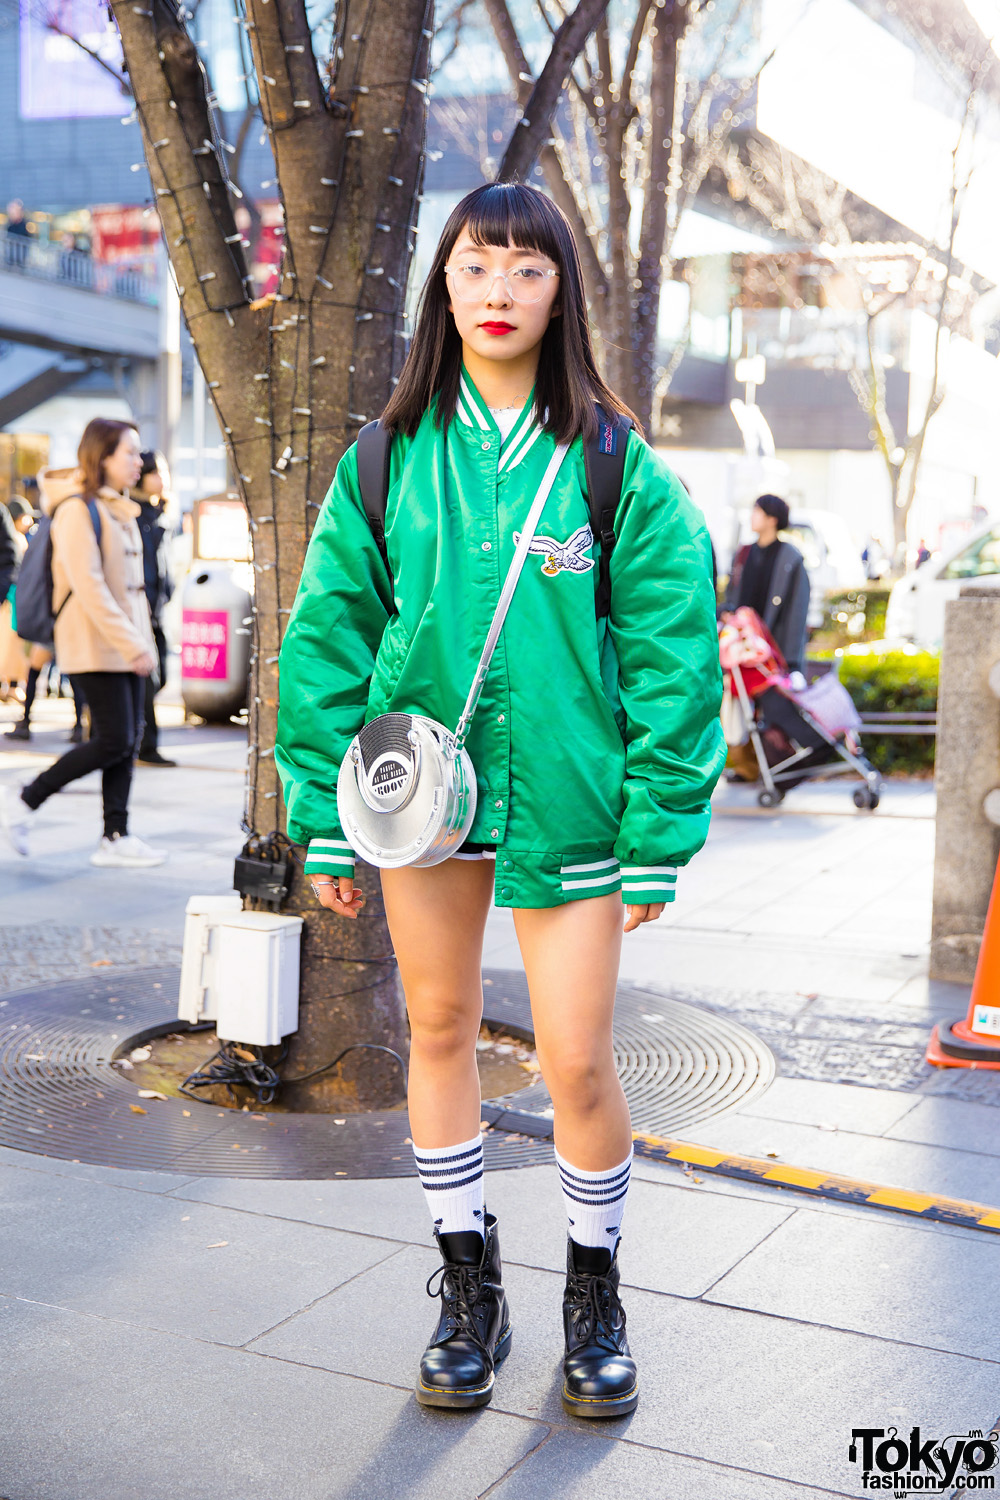 Harajuku Girl Sporty Chic in Green Bomber Jacket, Stussy Top, Moussy Bag & Dr. Martens Boots